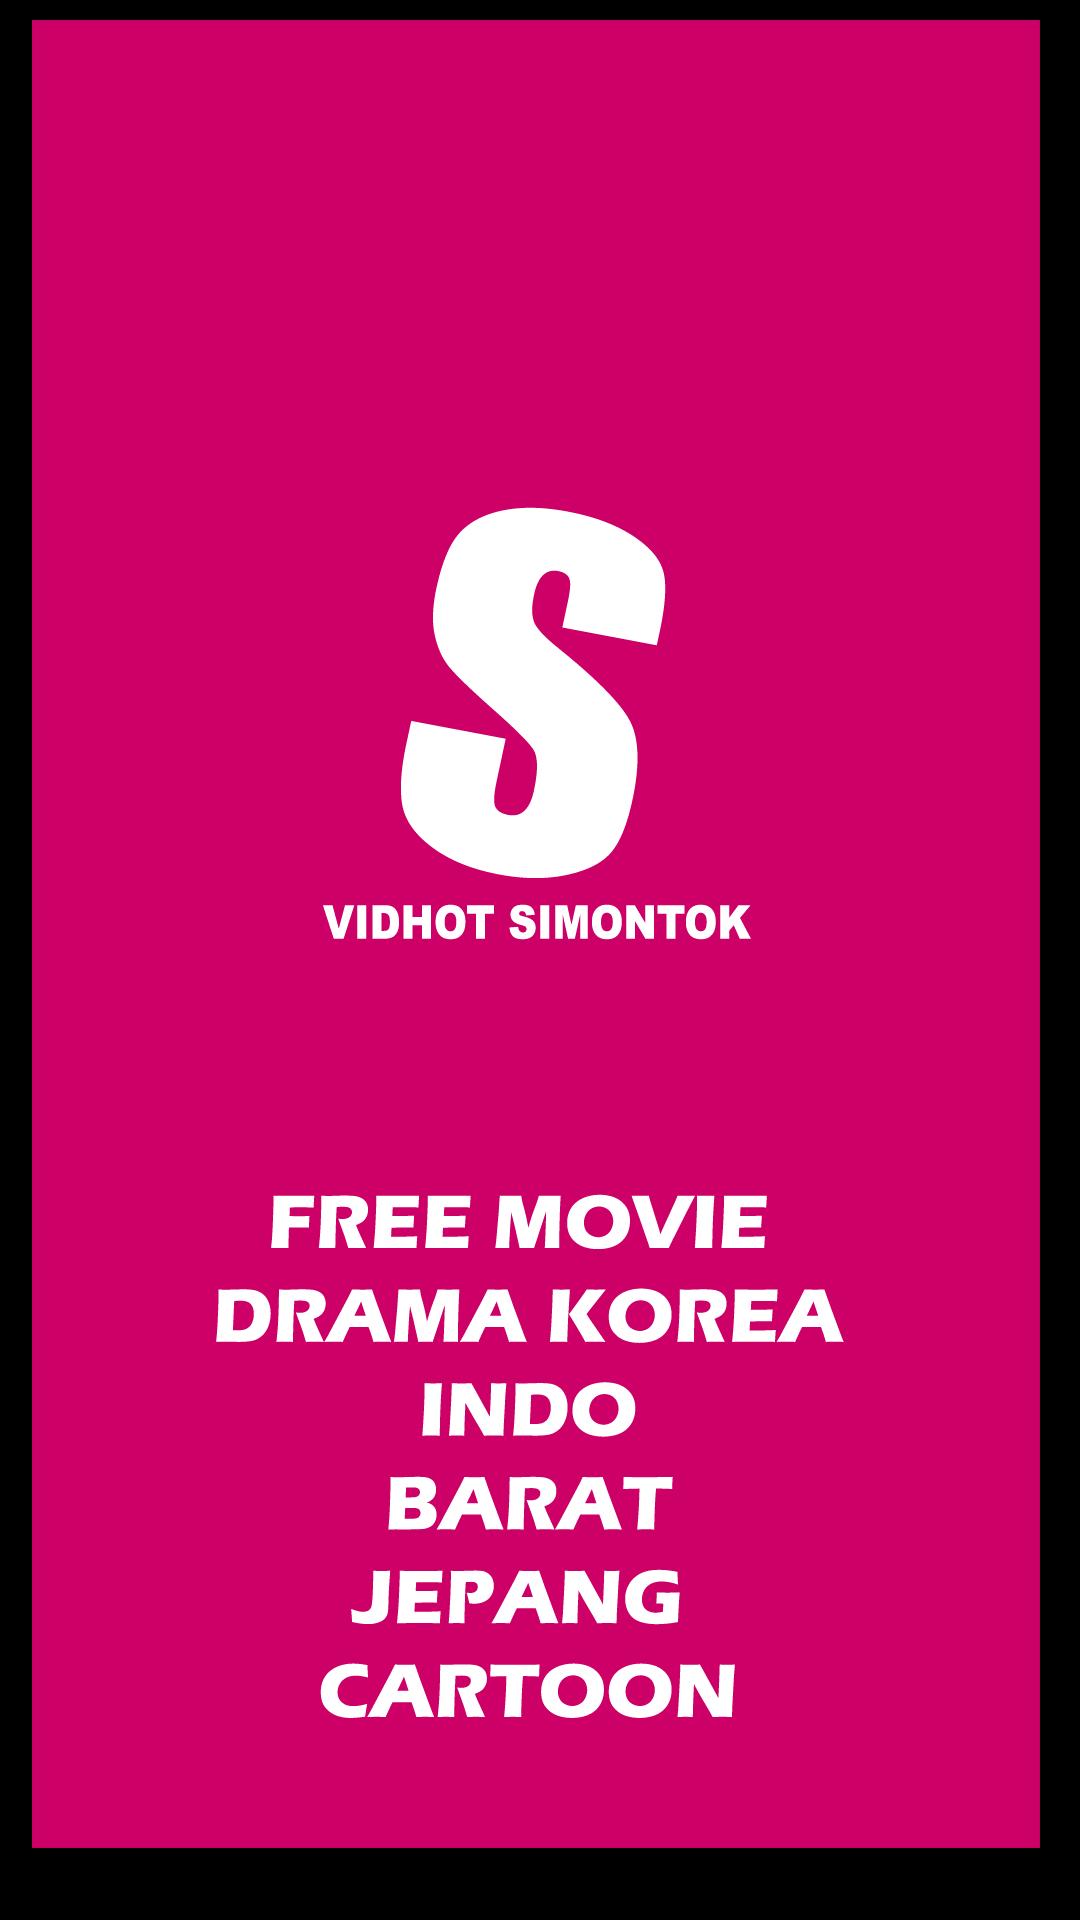 VidHot Simontok Application for Android - APK Download1080 x 1920